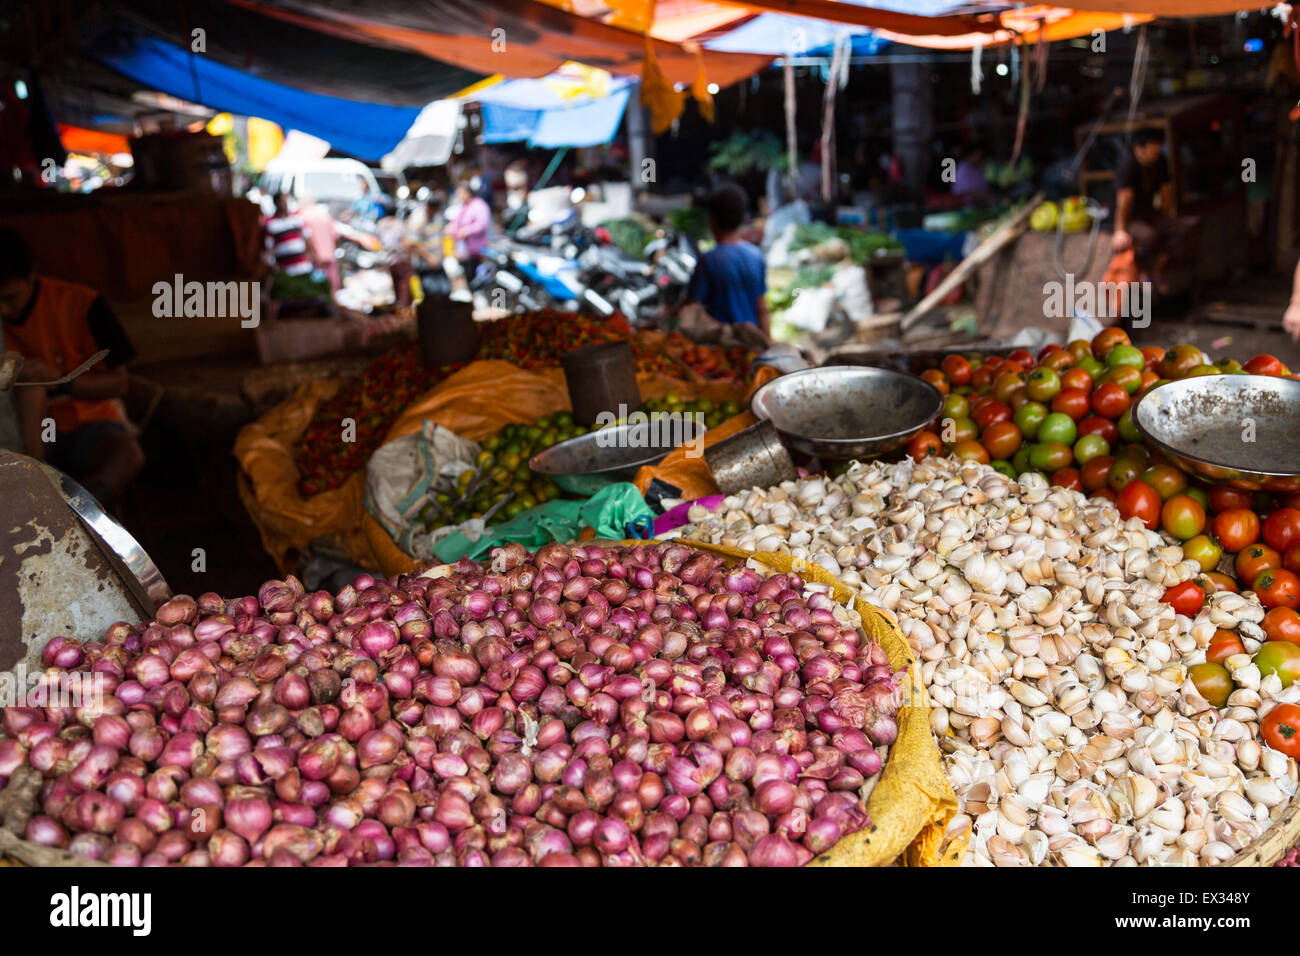 Fruits and vegetables are displayed at the Tomohon Market of the Minahasa Highlands in Sulawesi, Indonesia. Stock Photo